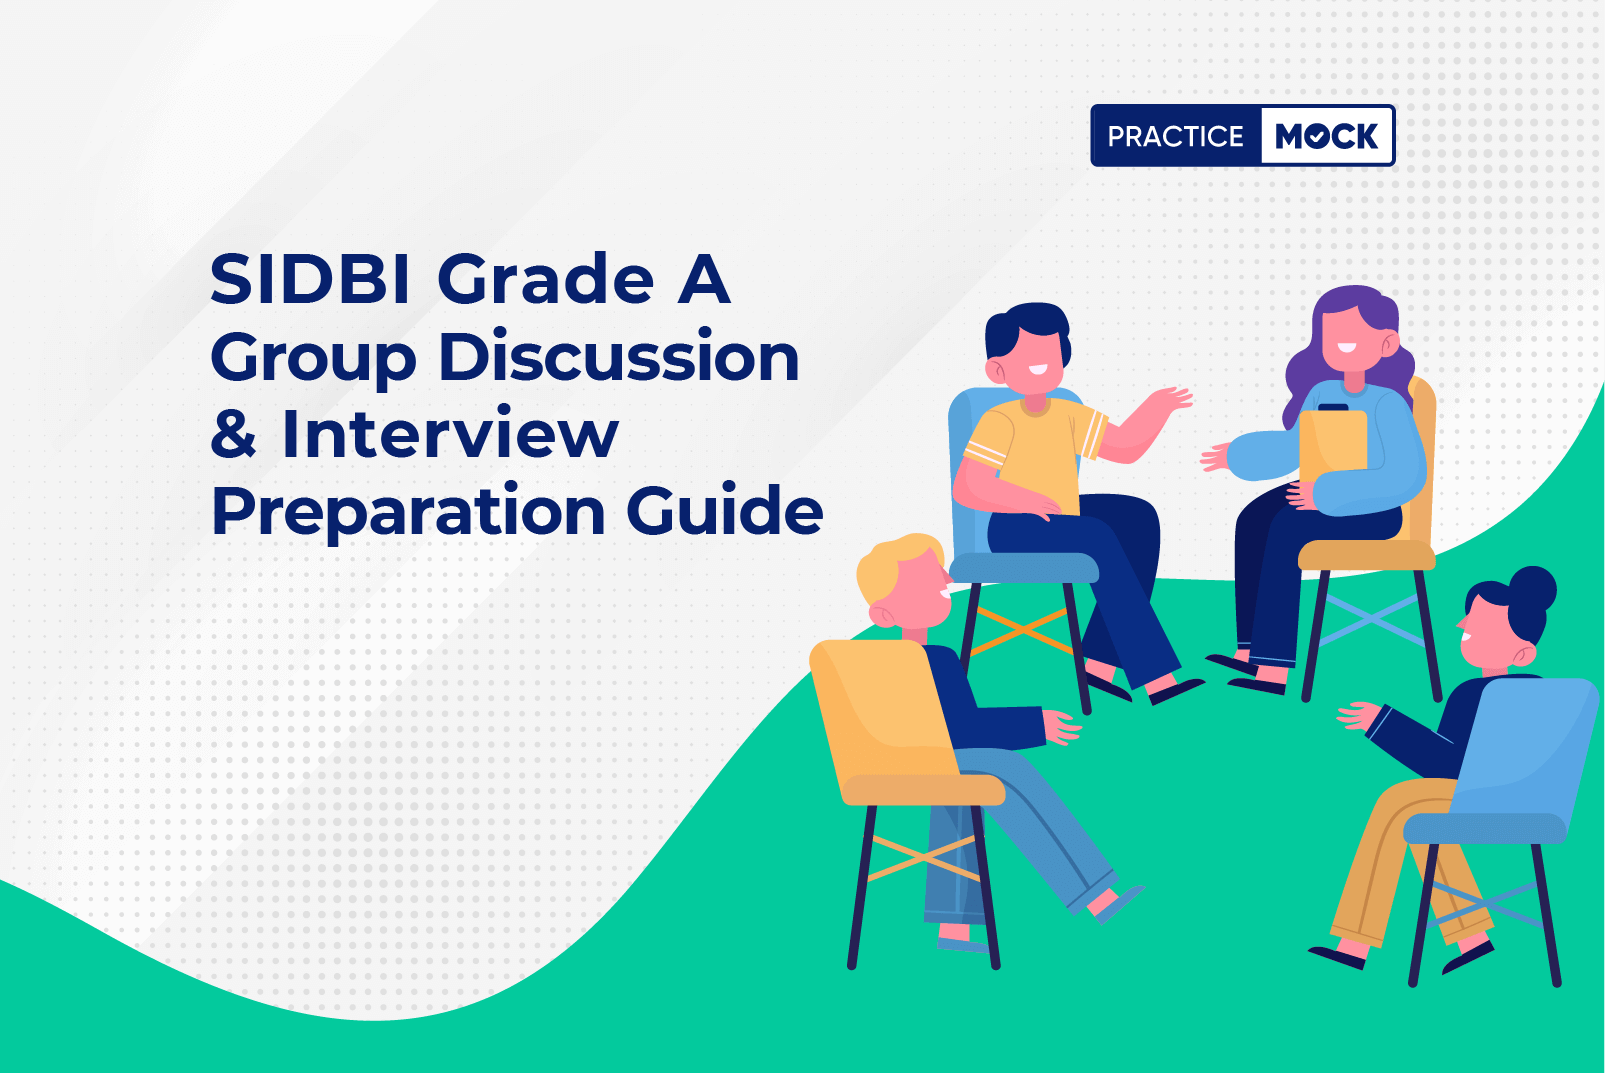 SIDBI Grade A Group Discussion & Interview Preparation Guide